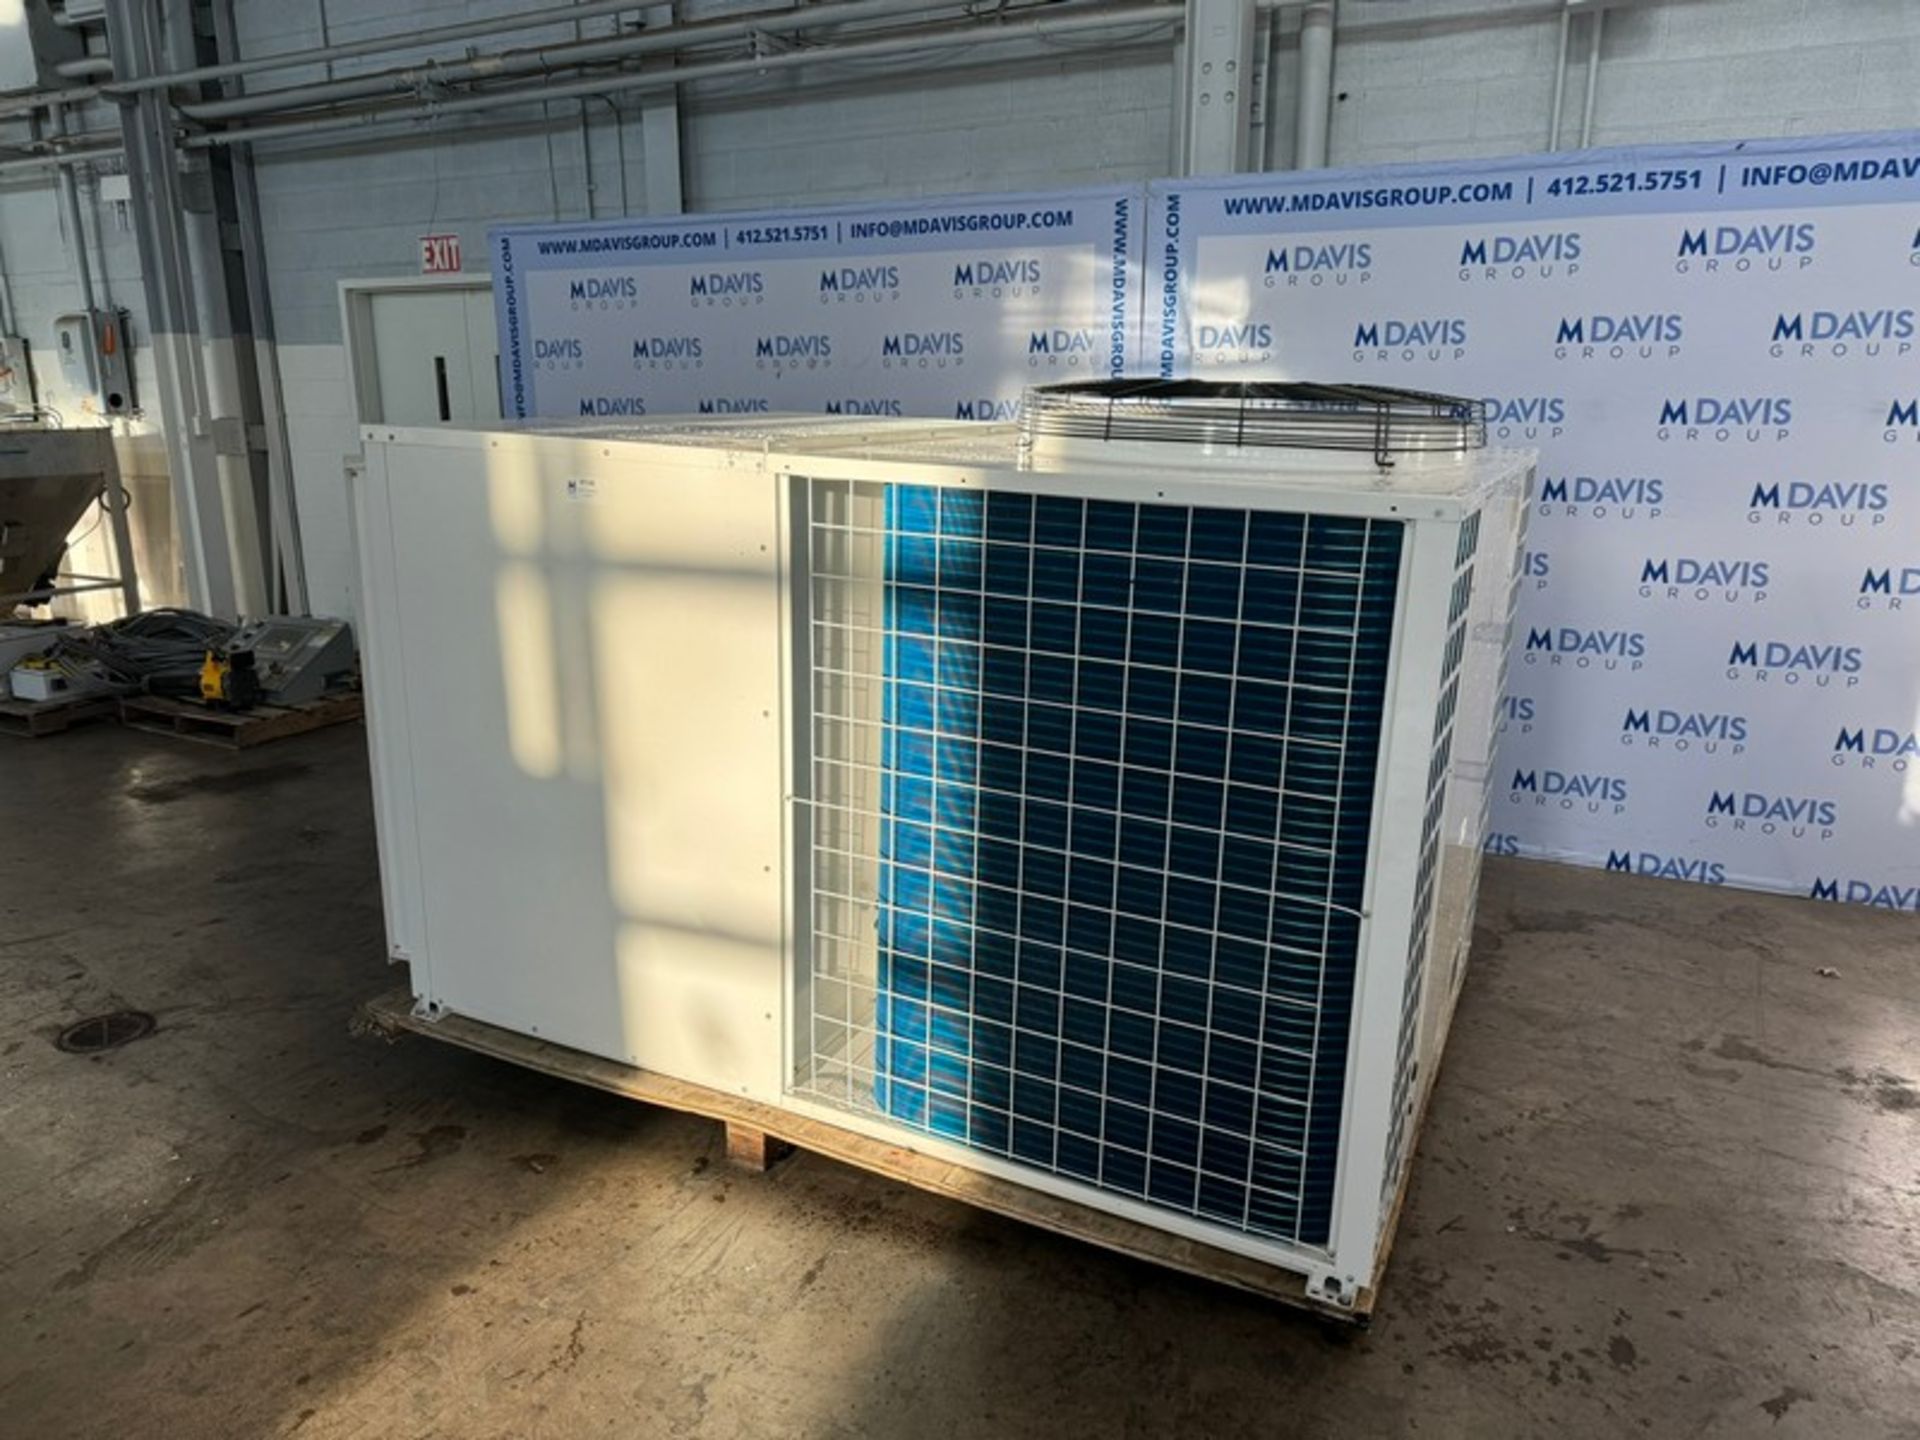 NEW 2022 SHENHLIN Roof Mounted Air Cooled Package Unit, S/N C5020221018R001, Cooling Capacity 70 kW,